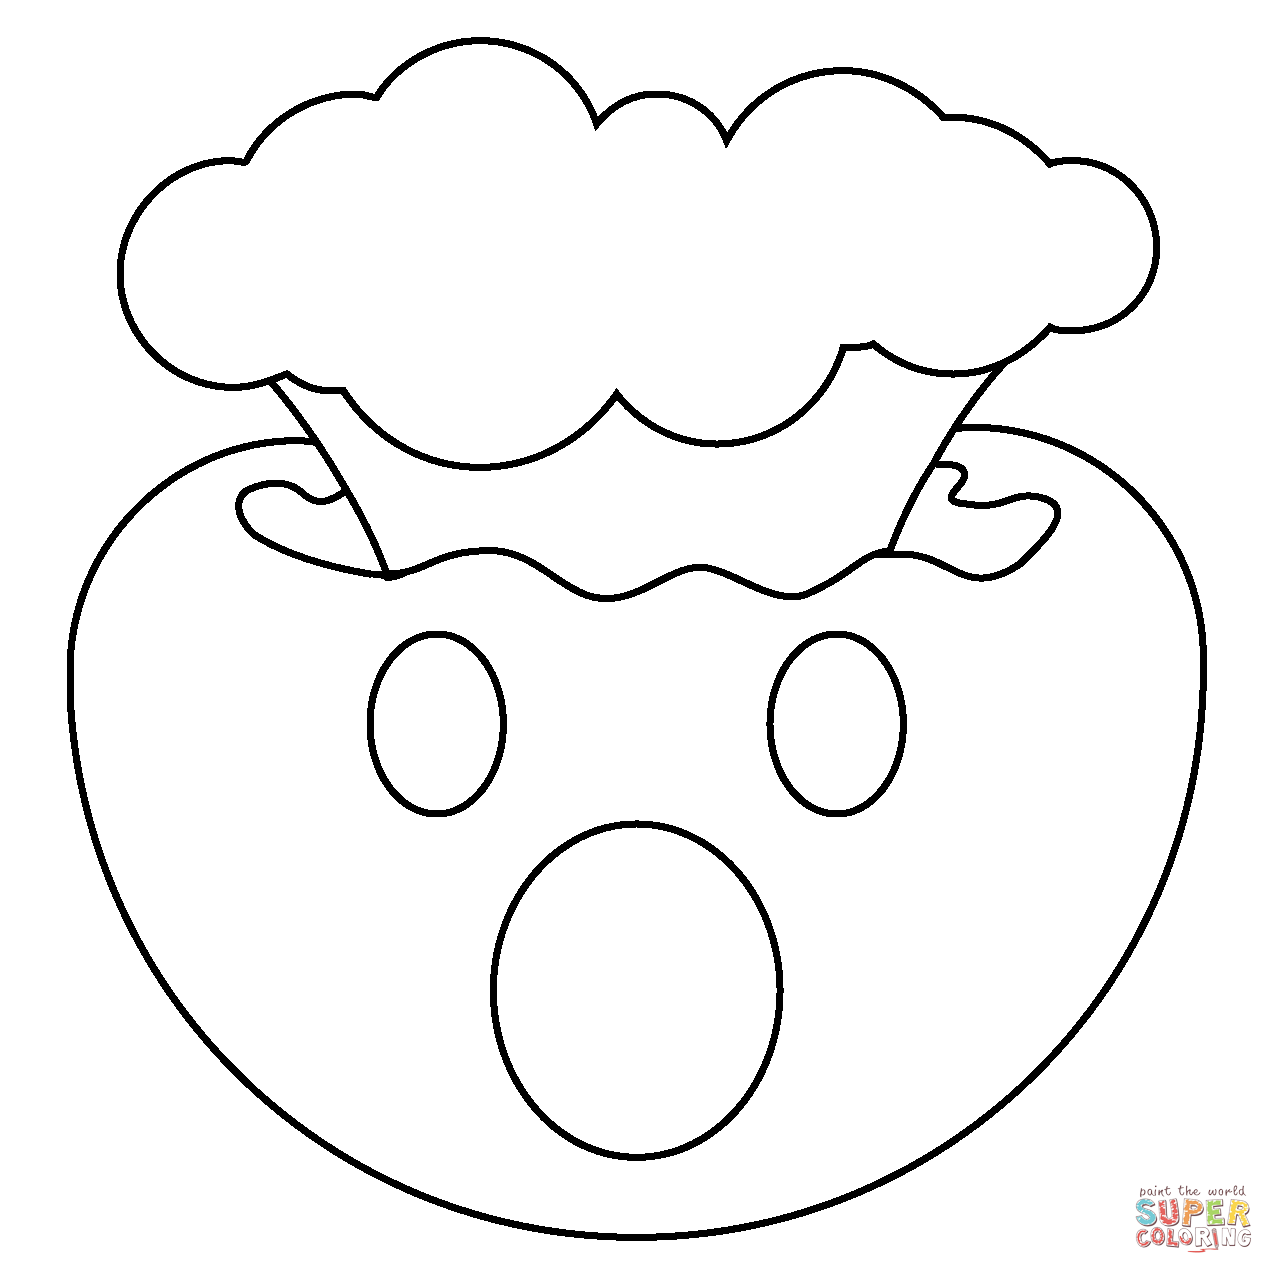 Exploding head emoji coloring page free printable coloring pages